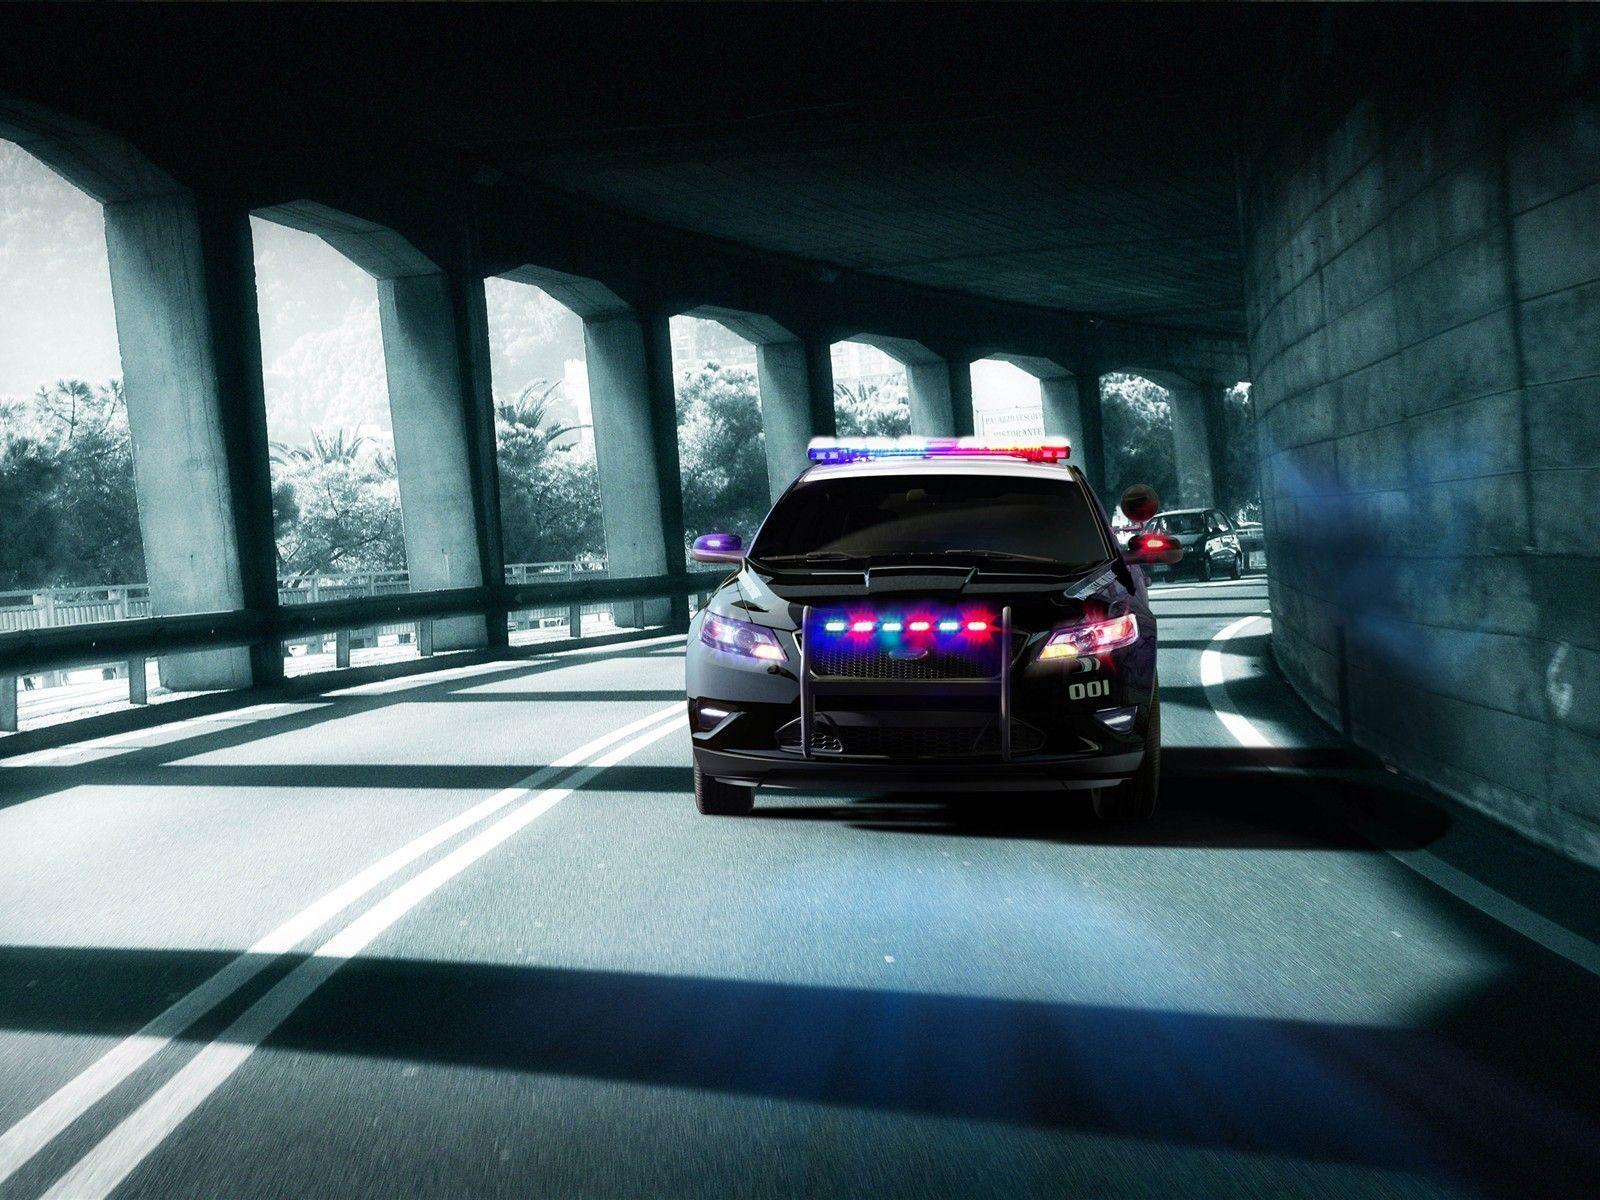 17800 Police Car Stock Photos Pictures  RoyaltyFree Images  iStock